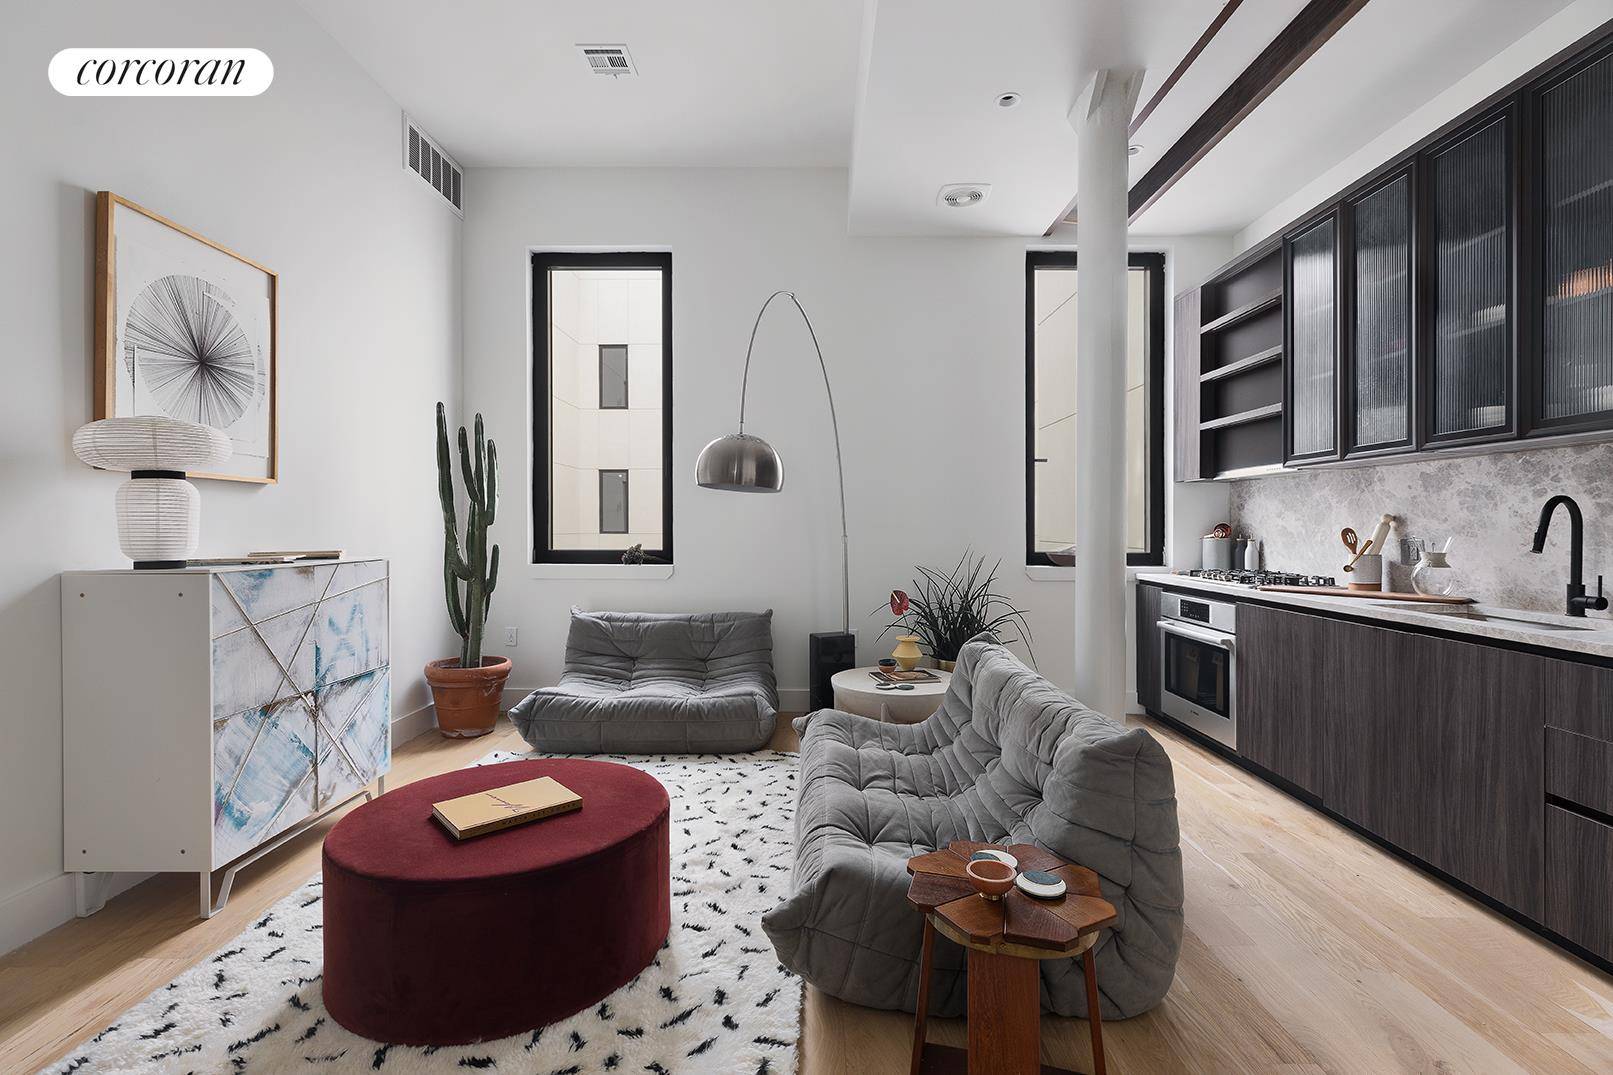 IMMEDIATE OCCUPANCY The new 10 Quincy Street The Salvation Lofts is a rare and architecturally captivating authentic loft condo conversion, located on a quiet corner in one of Brooklyn's most ...